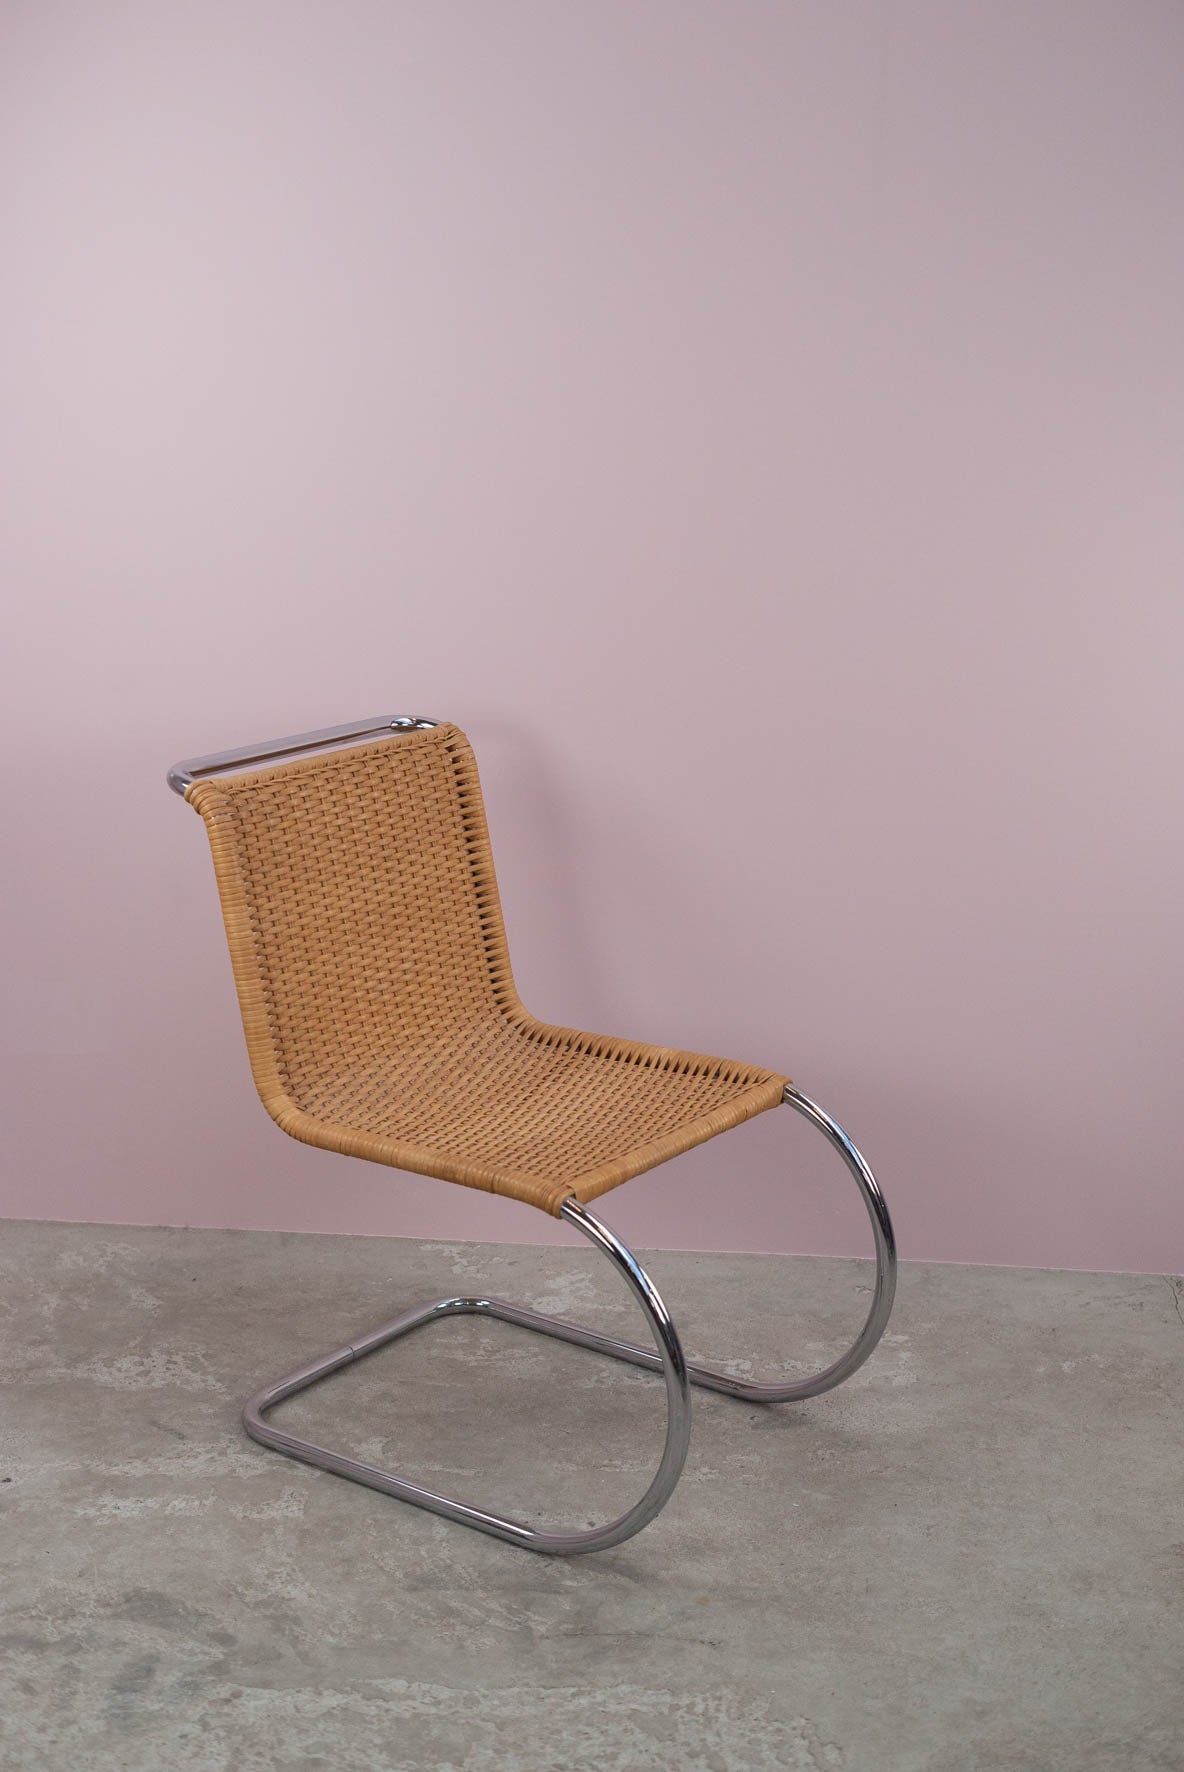 Design chair MR10 by Ludwig Mies van der Rohe for Thonet